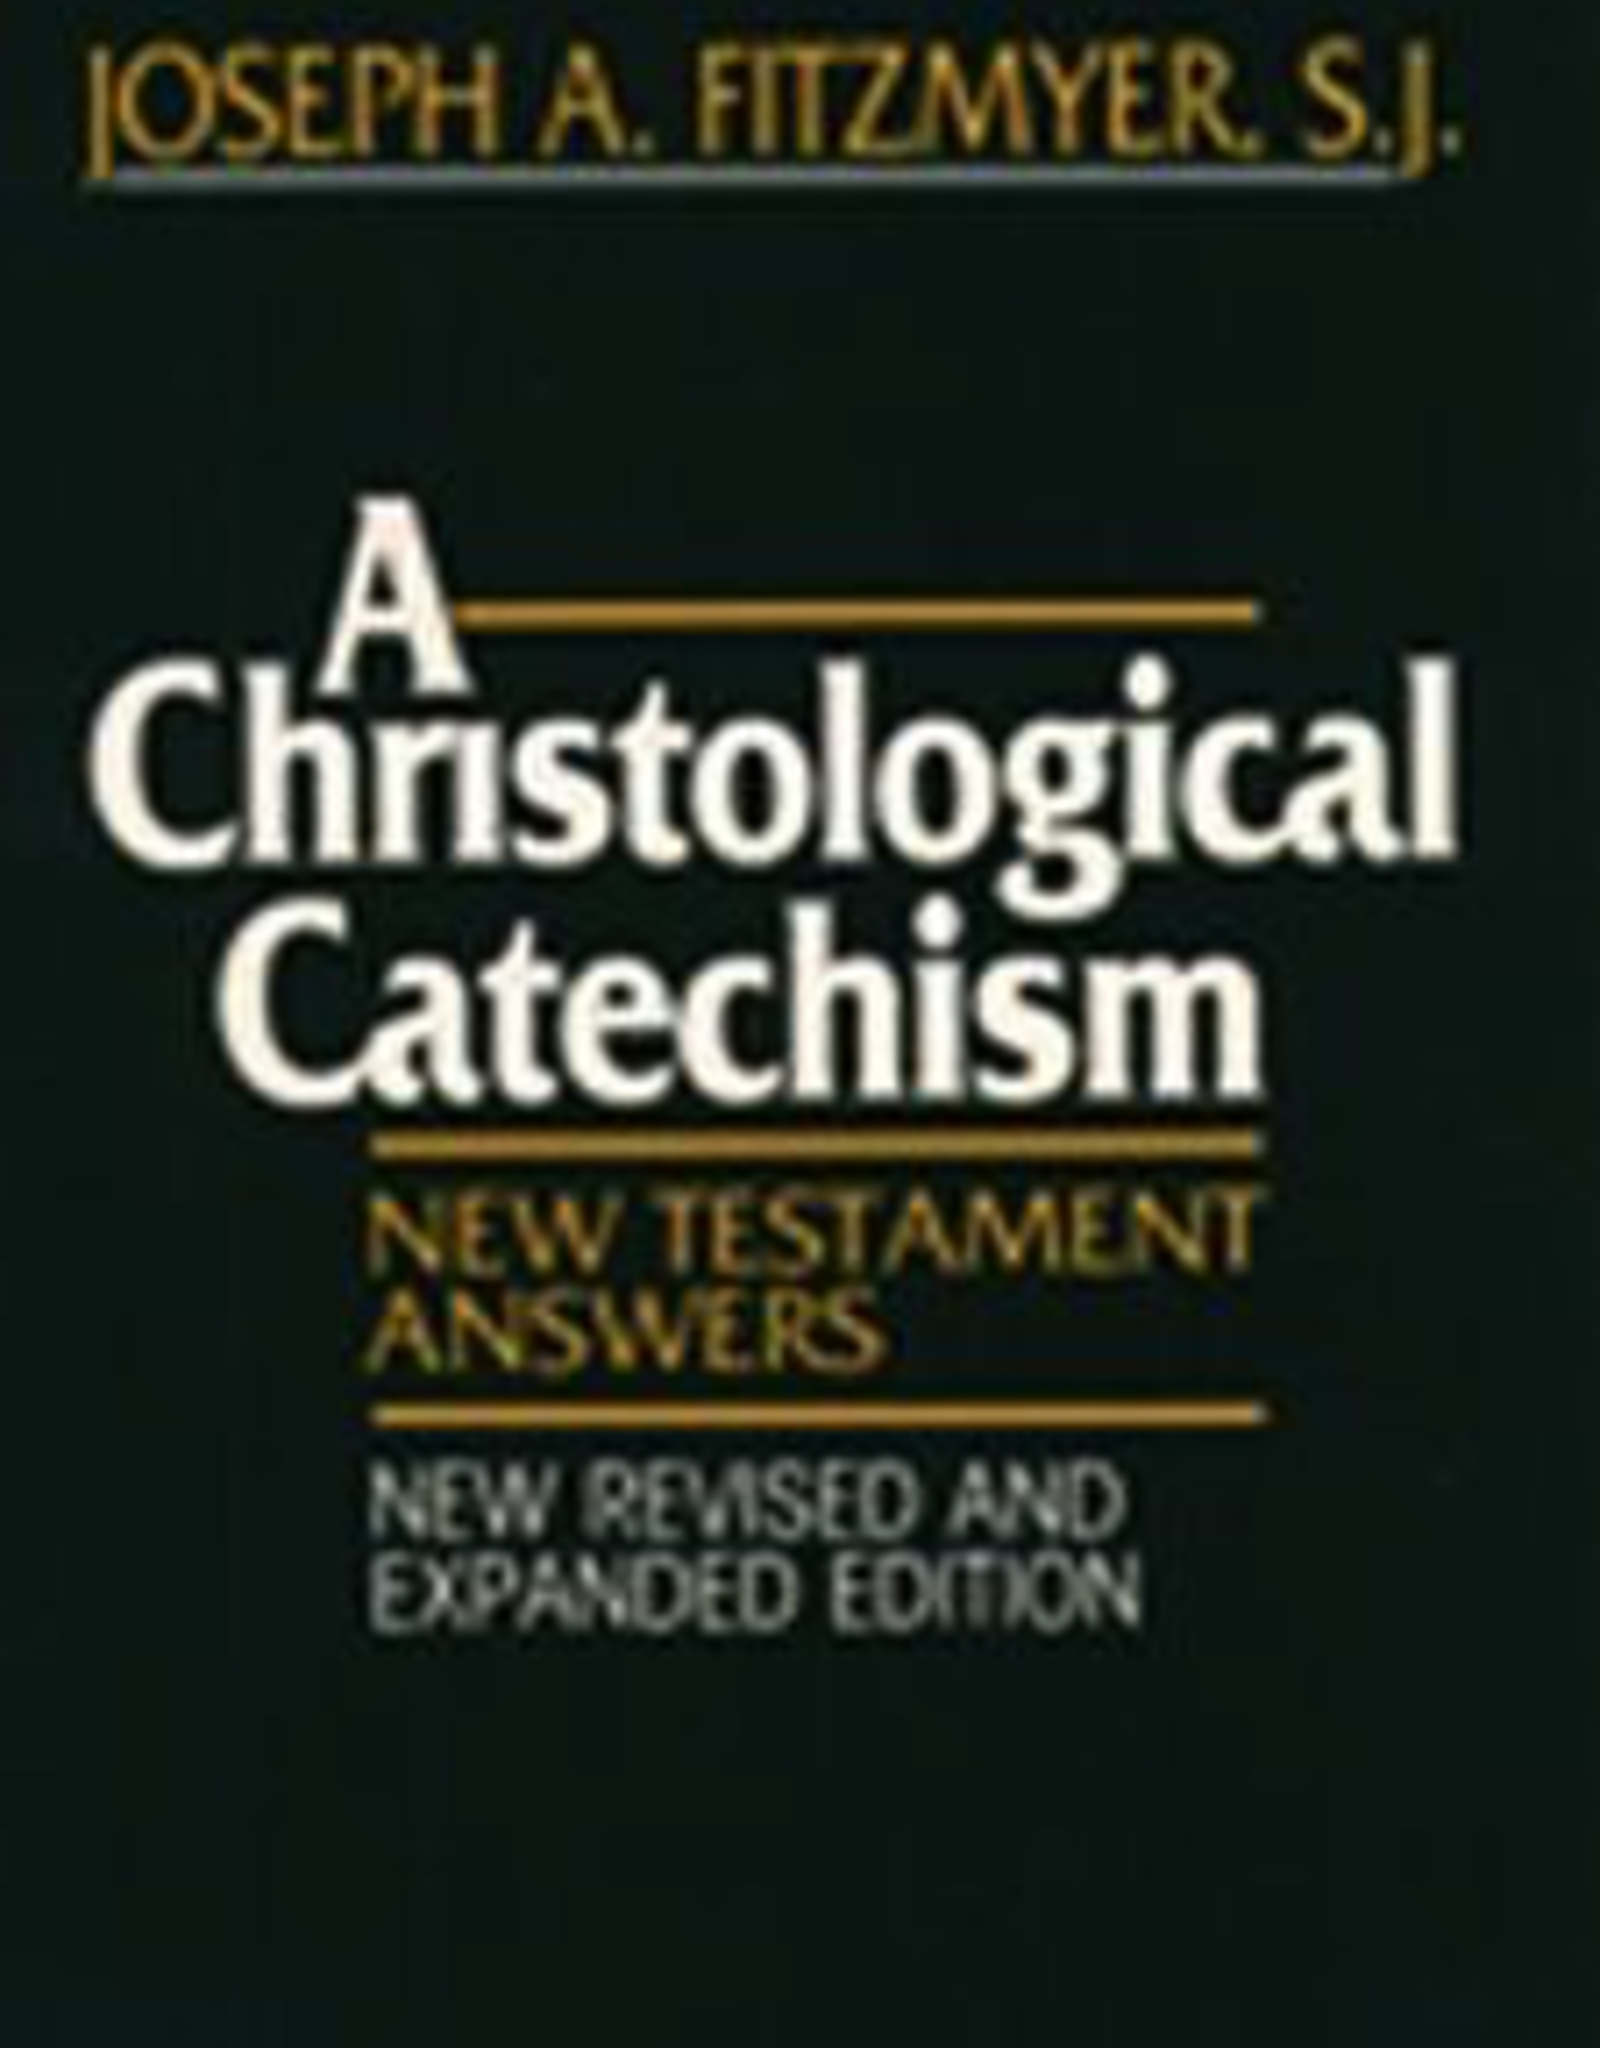 Paulist Press A Christological Catechism, Second Edition, by Joseph Fitzmyer (paperback)